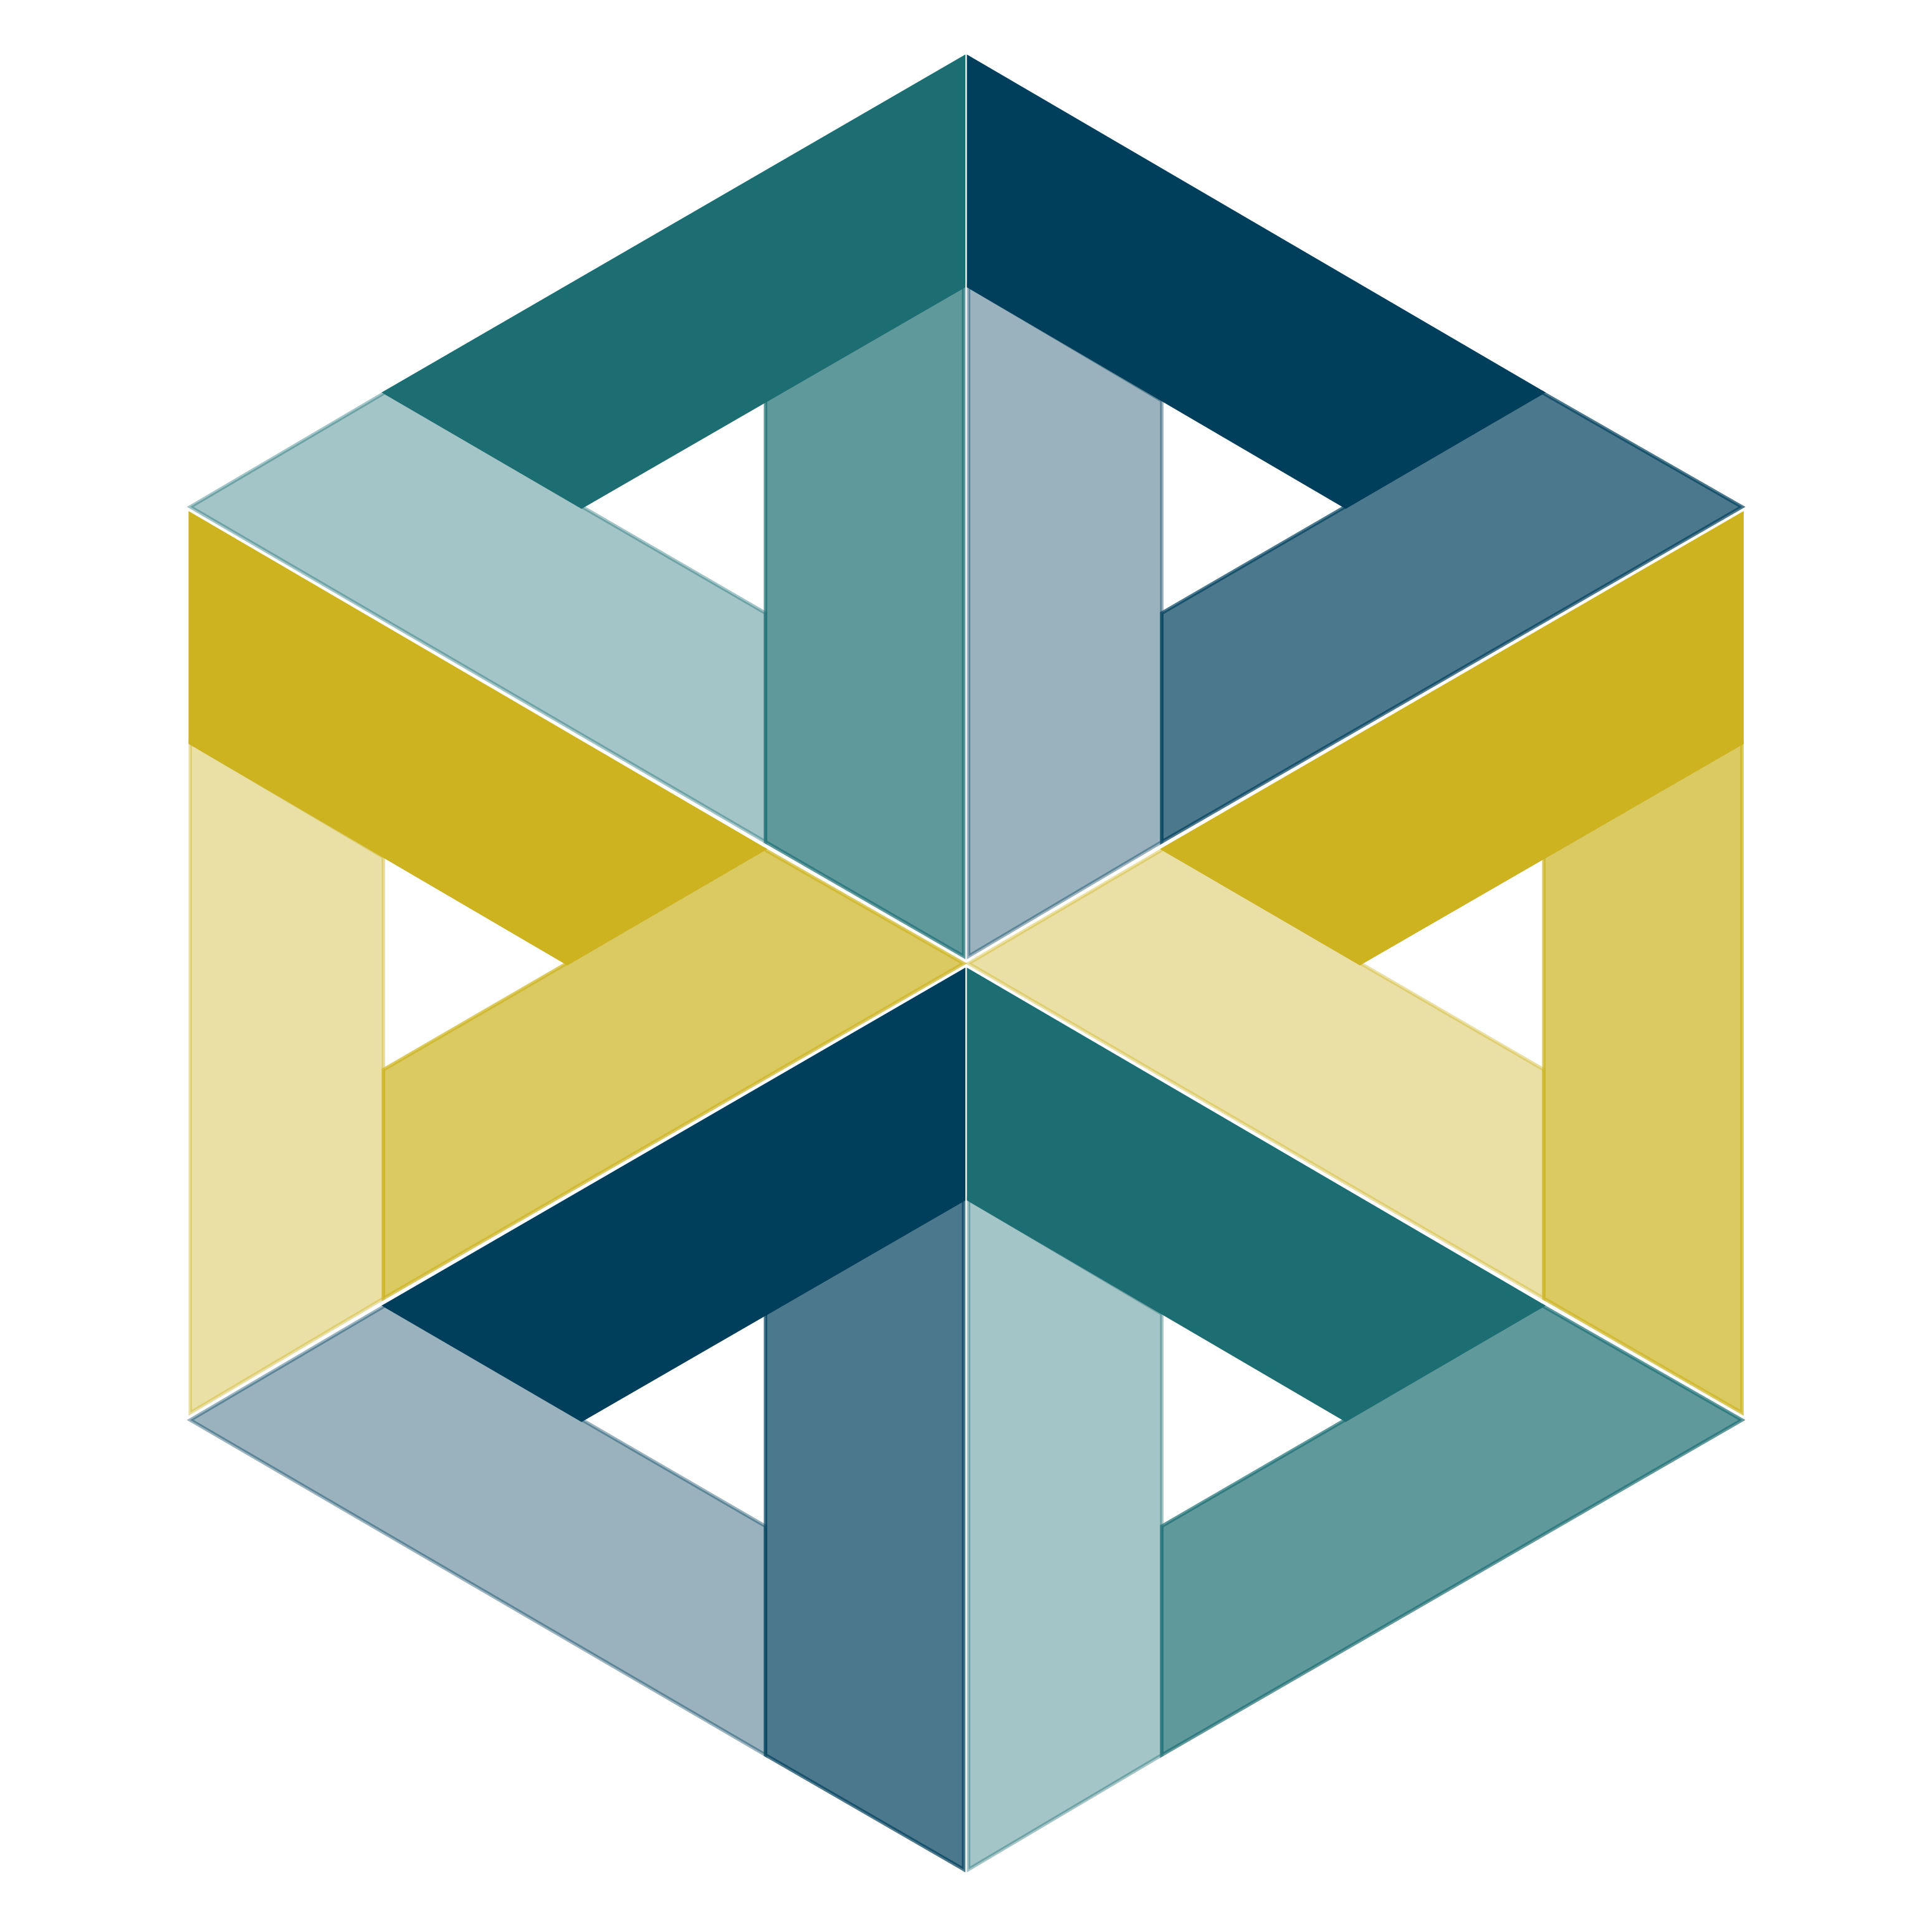 Hexagonal logo with yellow, purple, and teal triangles.